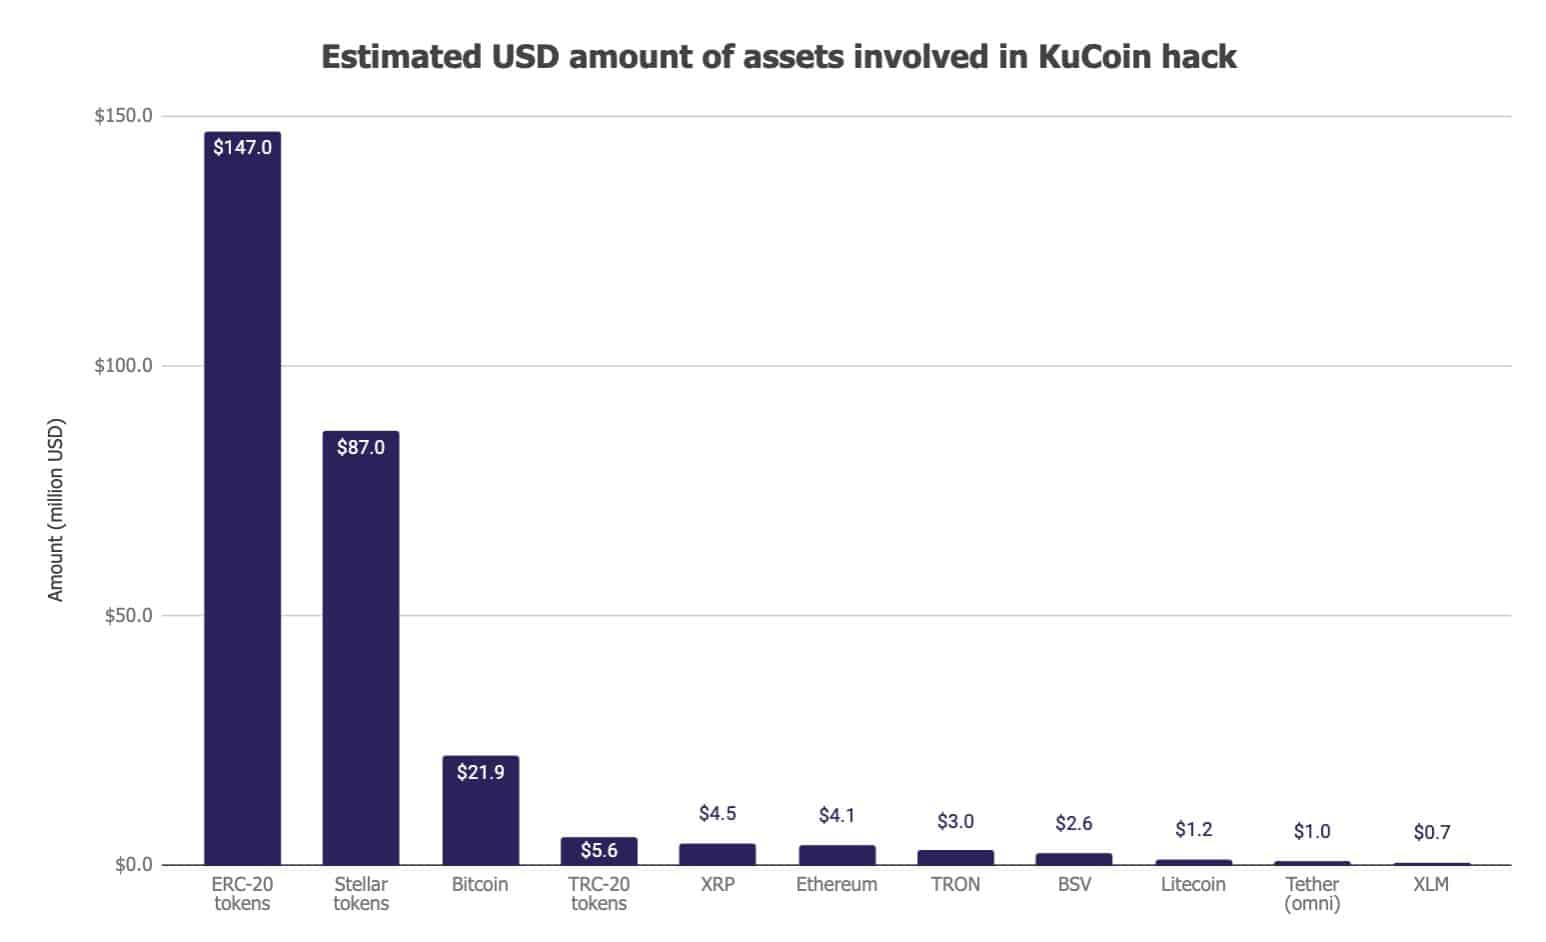 The KuCoin hack: full story & what's next | CryptoTvplus - The Leading Blockchain Media Firm